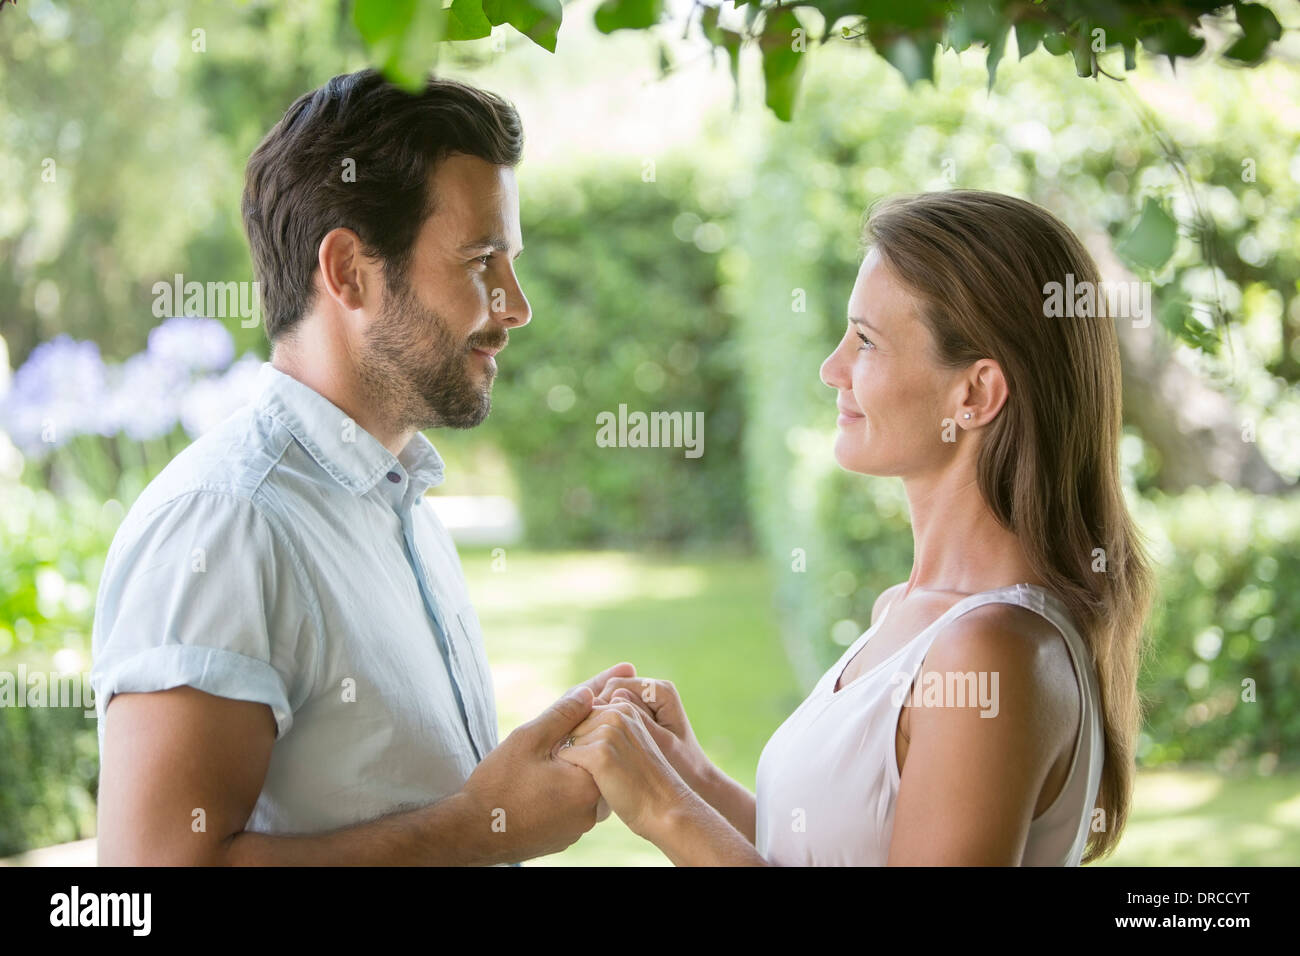 Couple holding hands face to face in garden Stock Photo